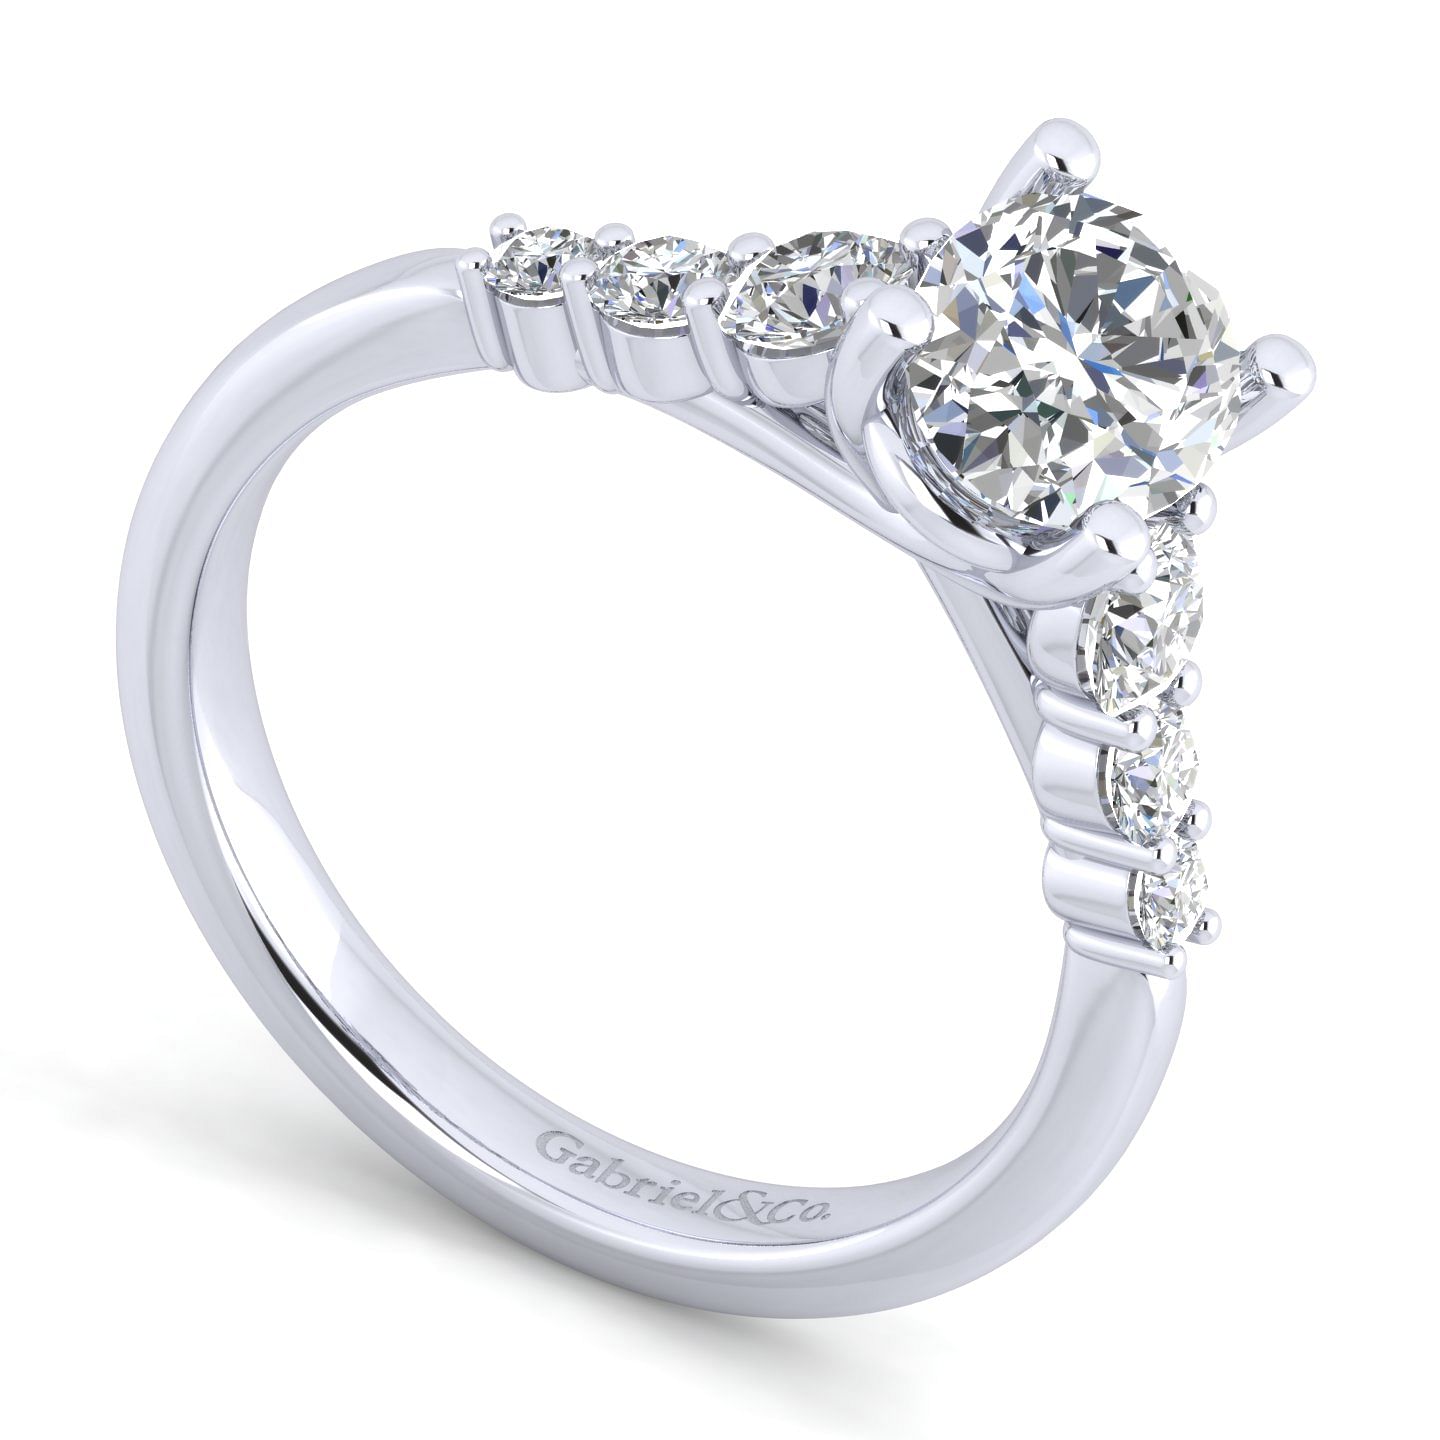 Darby - 14K White Gold Oval Diamond Engagement Ring - 0.47 ct - Shot 3